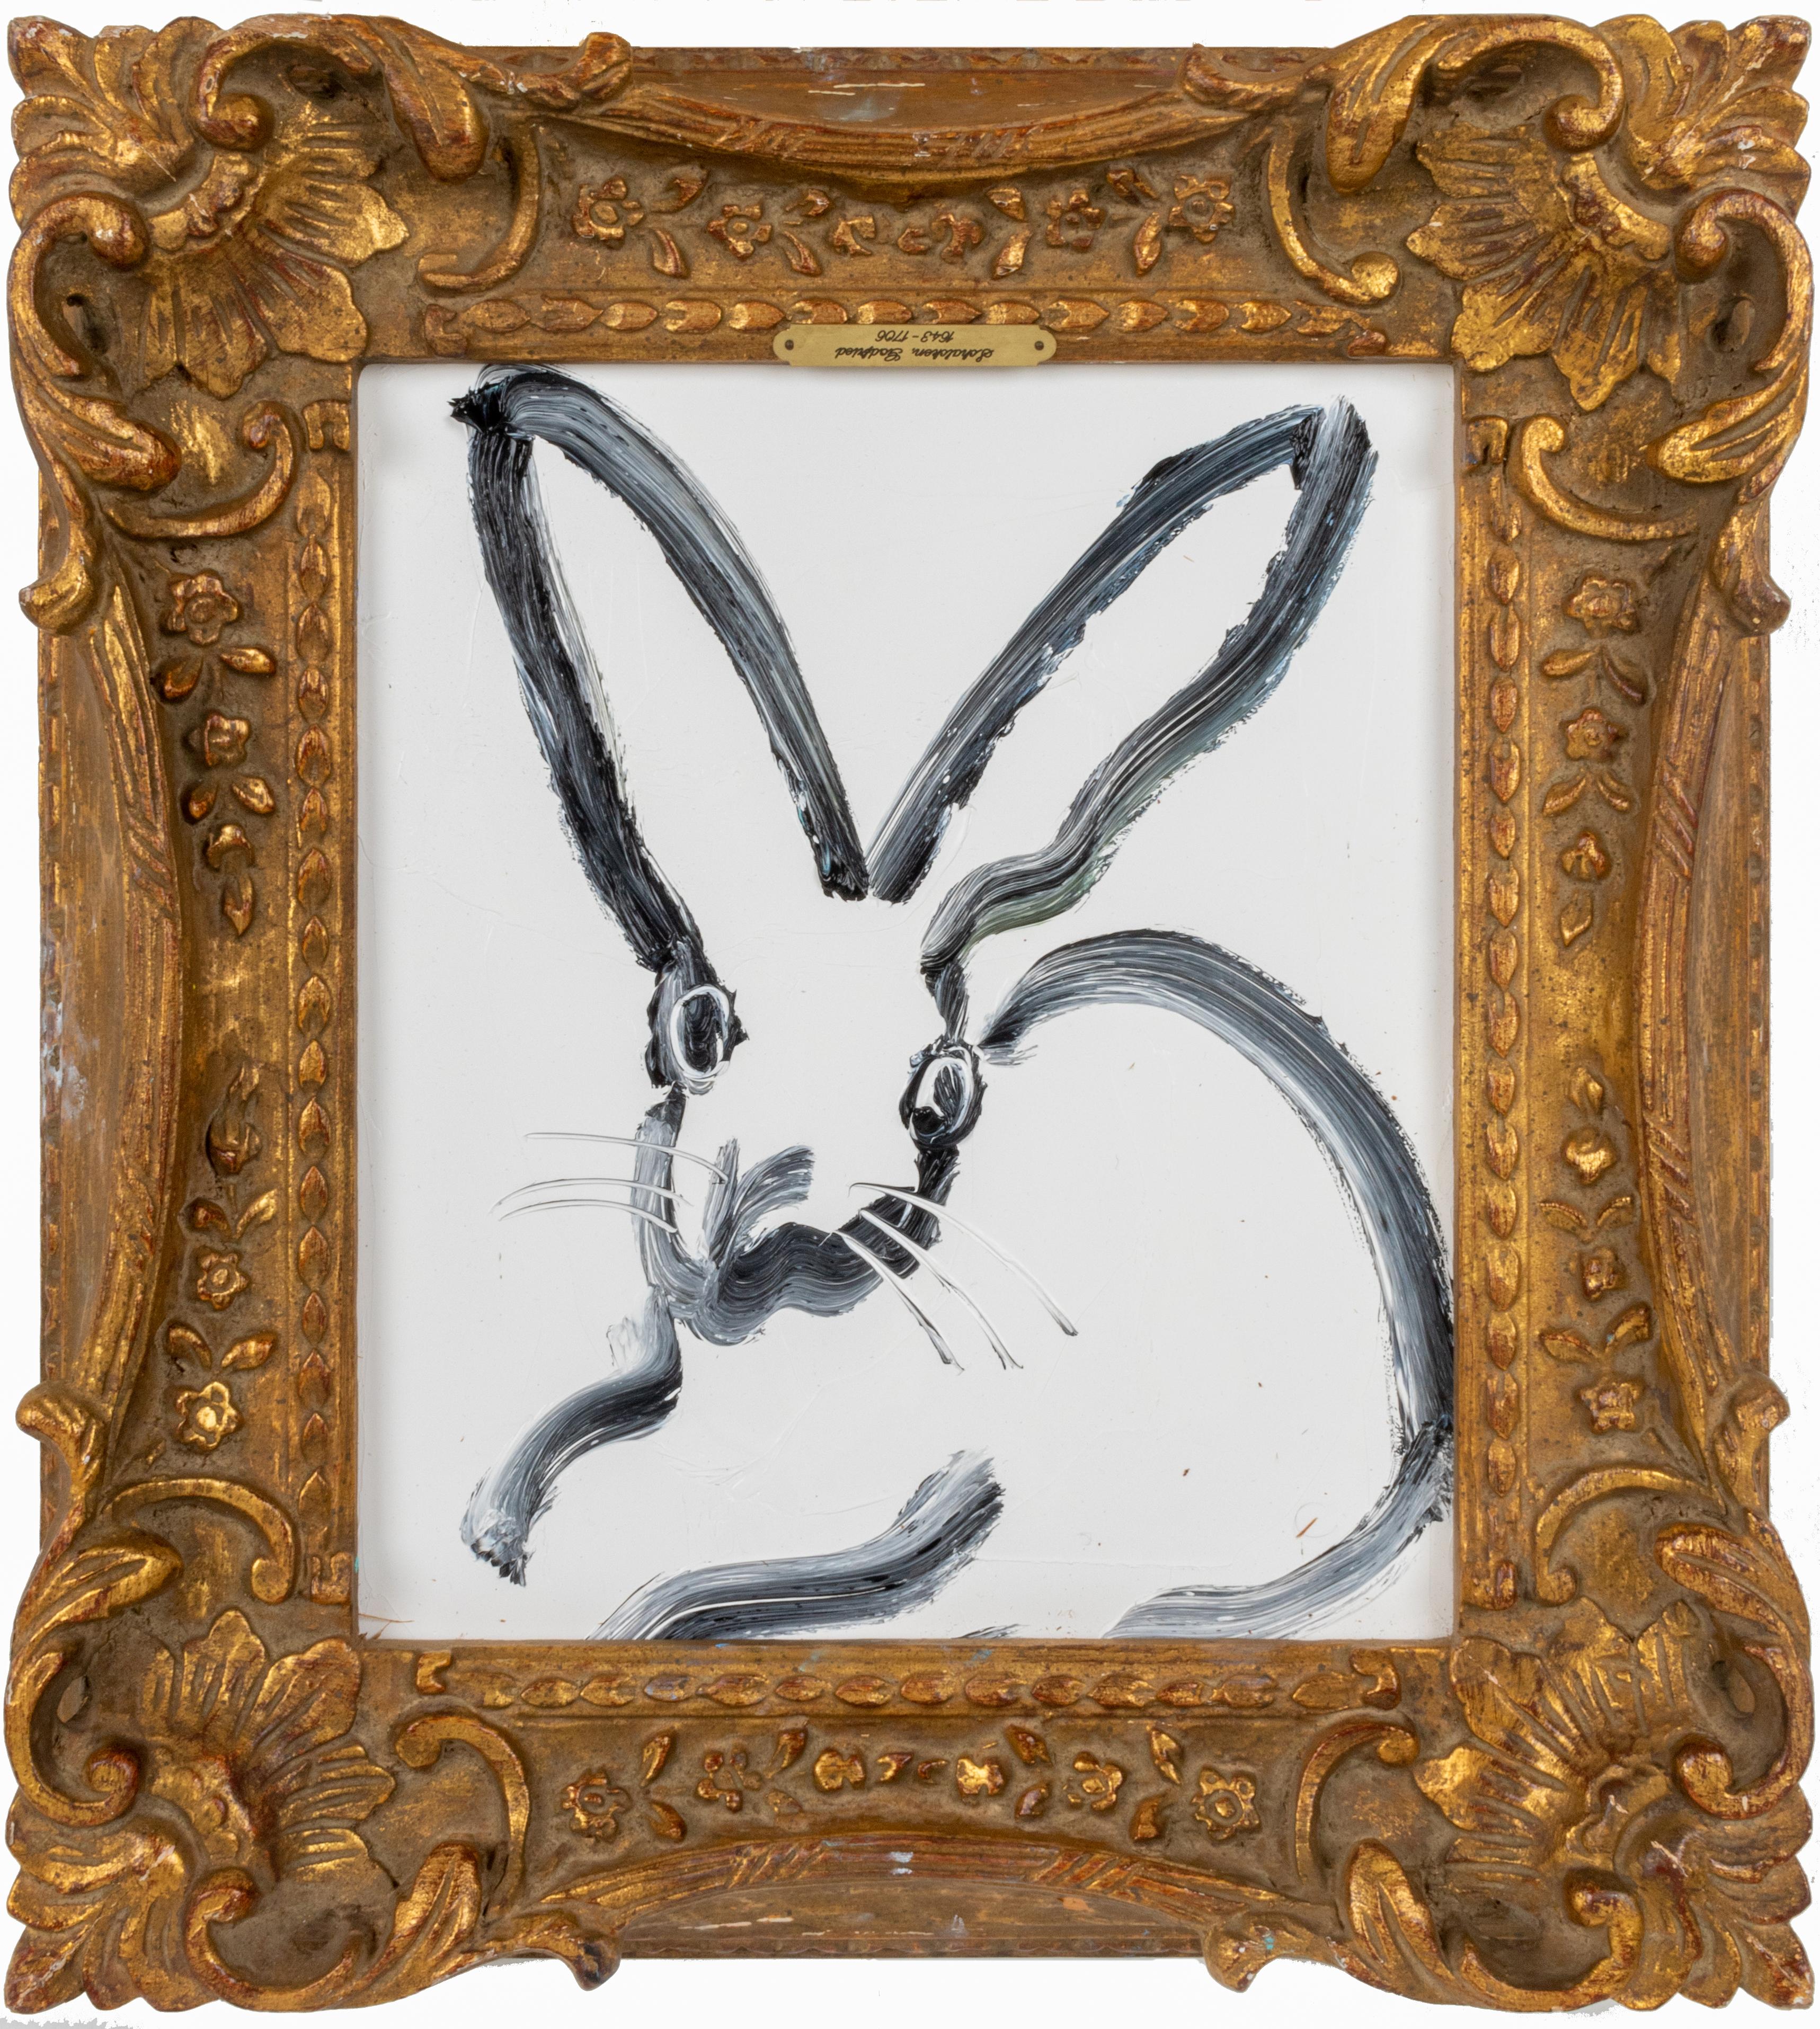 The Rabbit Hole- gestural white and black bunny painting in ornate frame - Painting by Hunt Slonem